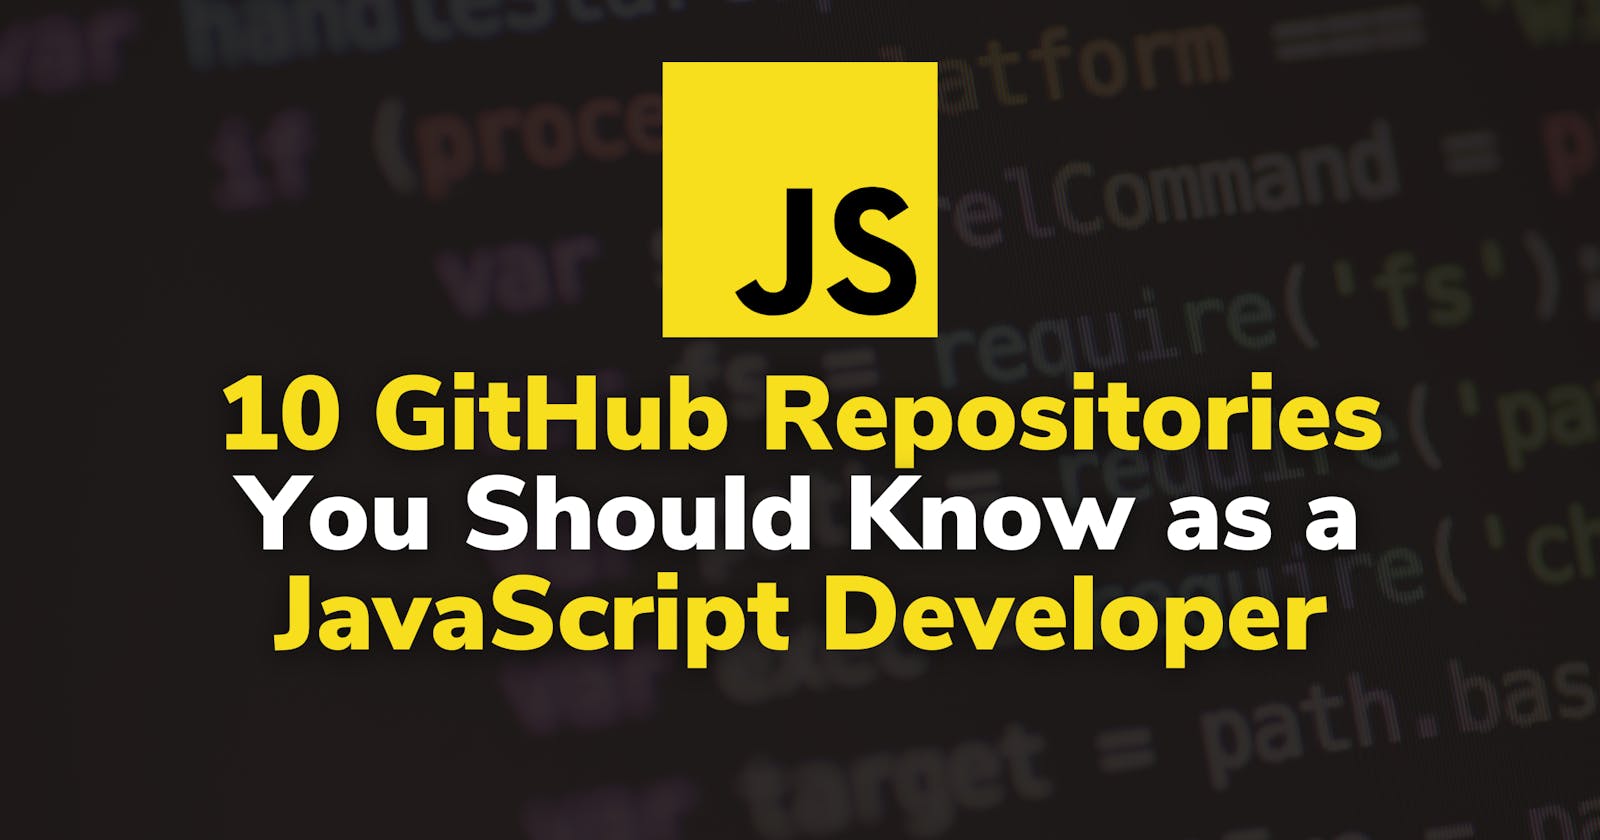 10 GitHub Repositories You Should Know as a JavaScript Developer